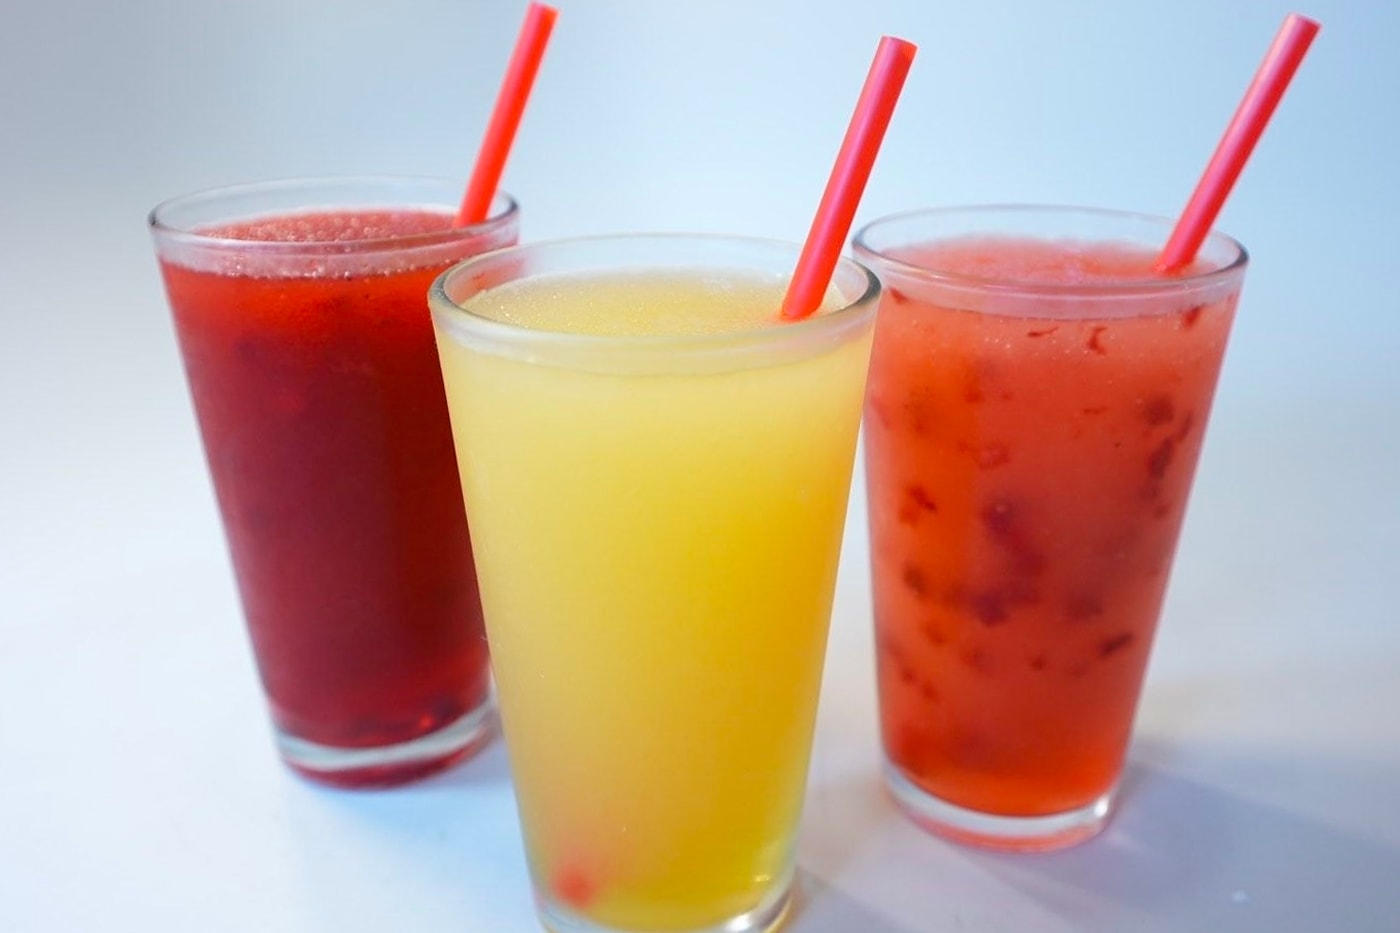 Sonic Alcohol Inspired Slushes 2021 Drink Lineup Info Taste Review Uncorked